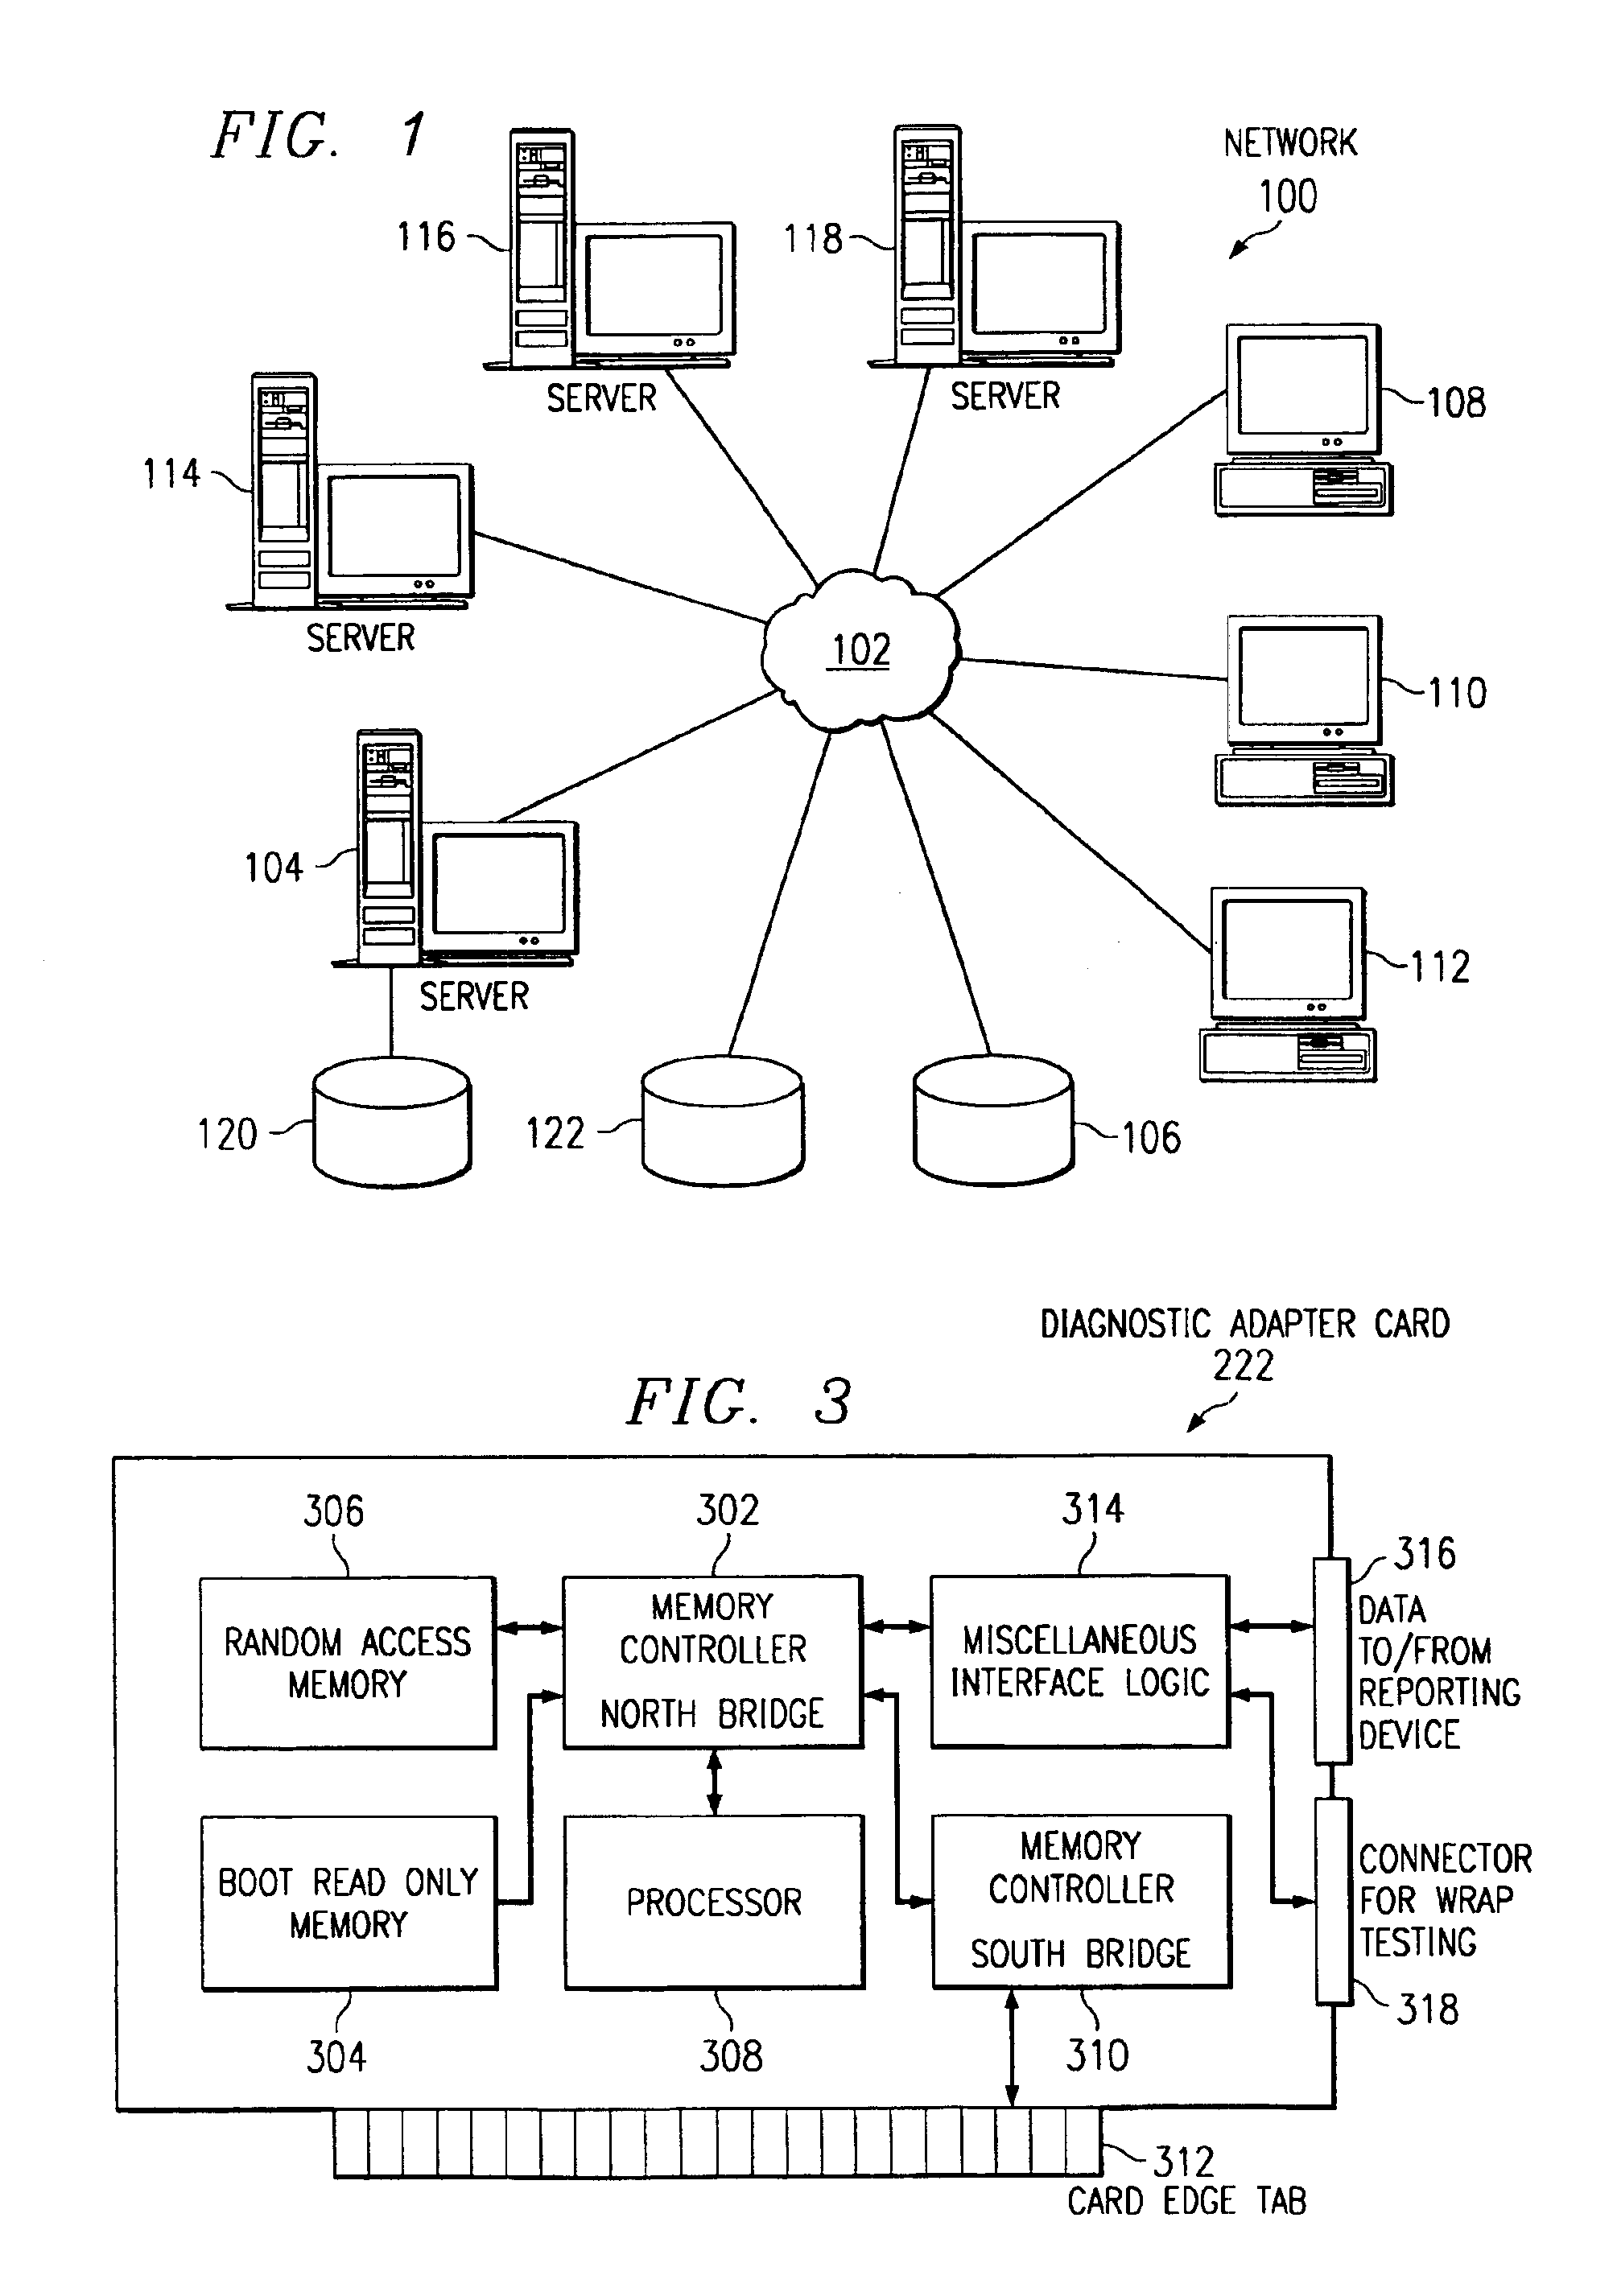 System and method of running diagnostic testing programs on a diagnostic adapter card and analyzing the results for diagnosing hardware and software problems on a network computer